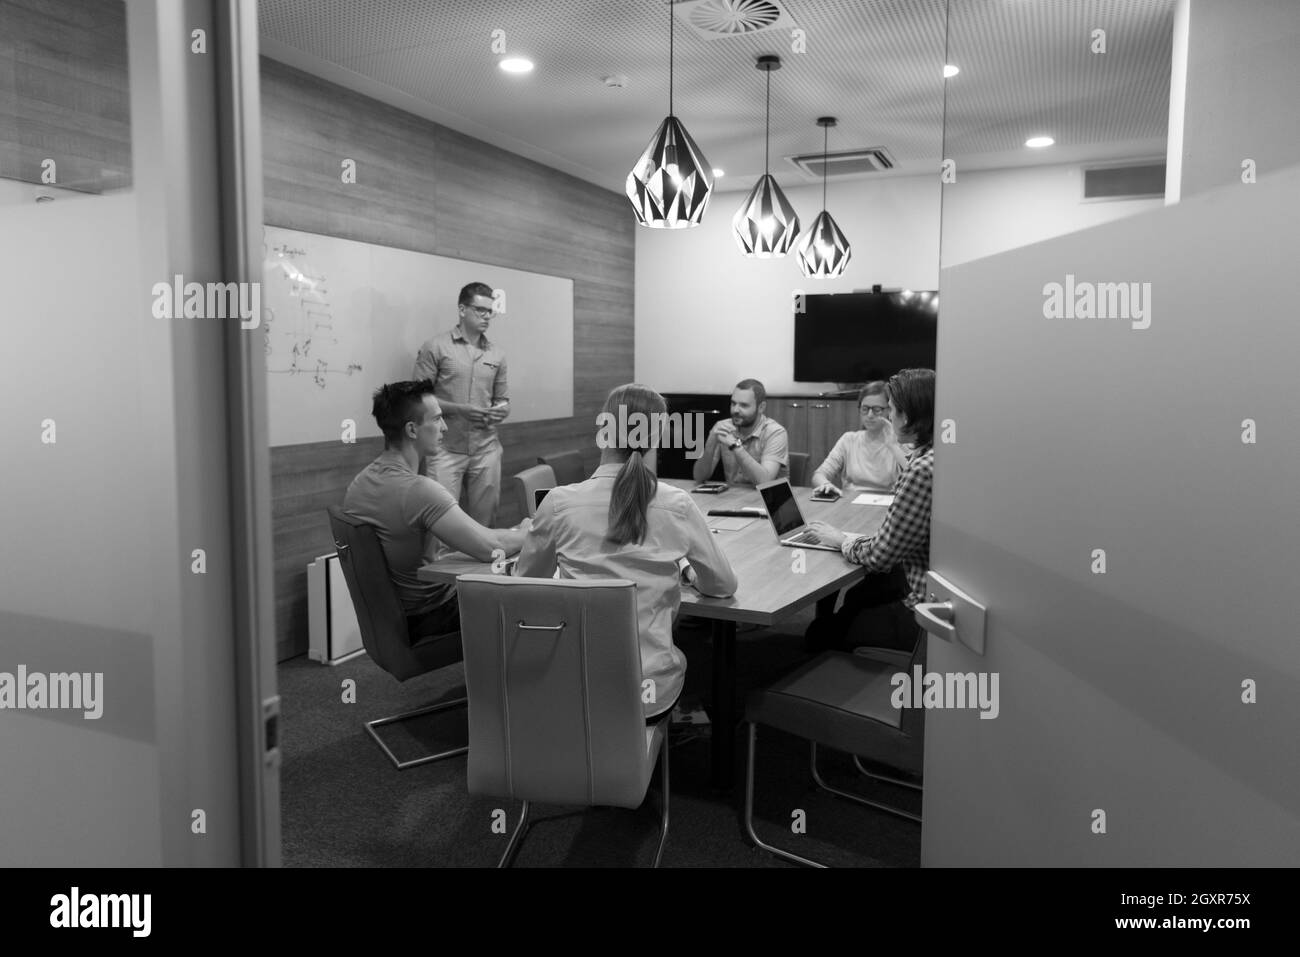 startup business people team brainstorming on meeting   working on laptop and tablet computer Stock Photo